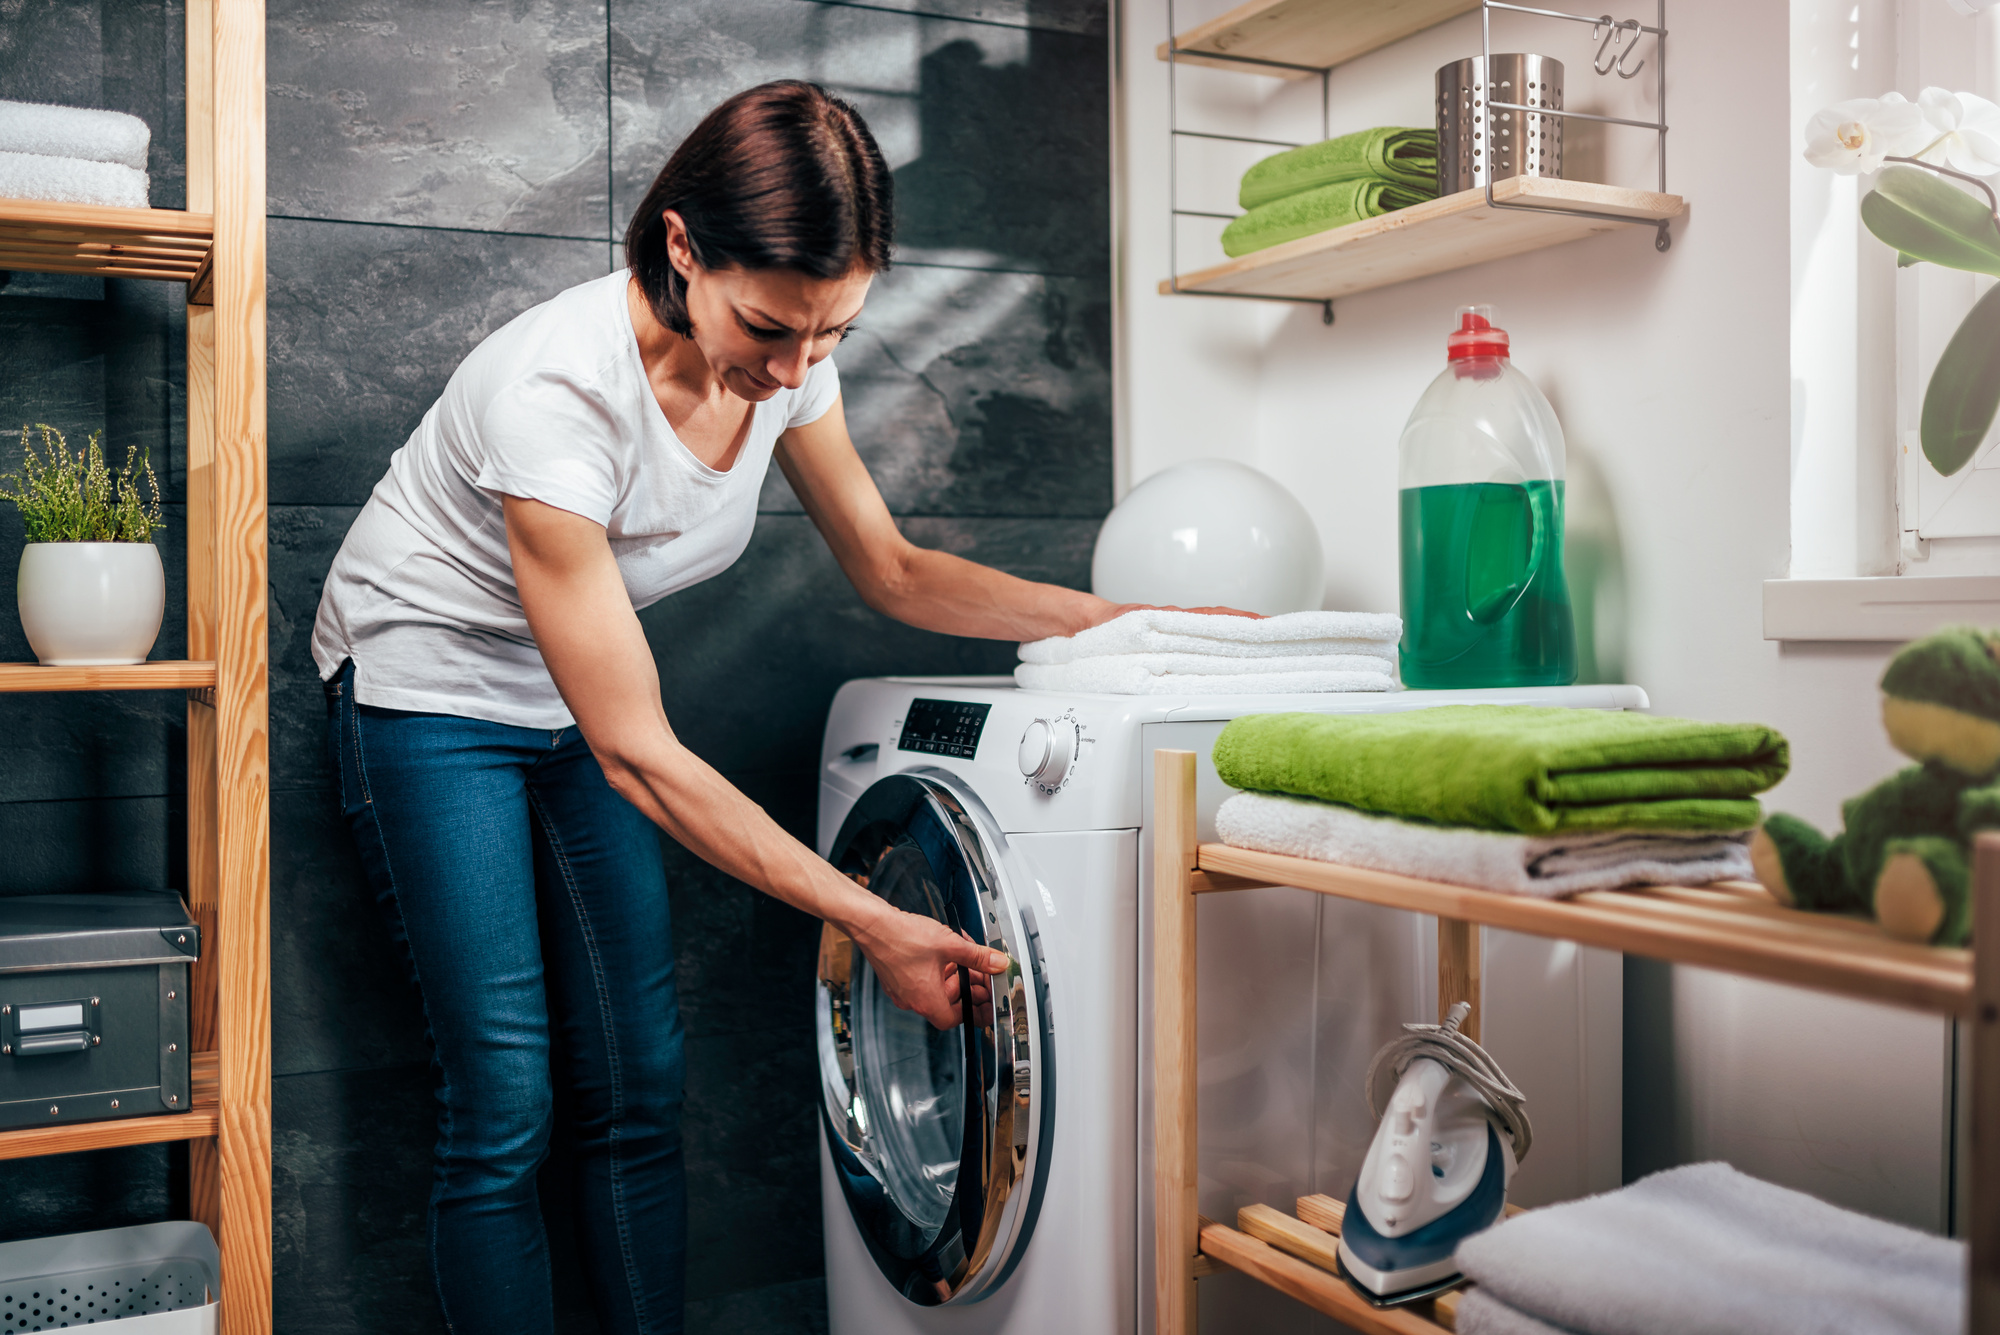 How To Clean a Washing Machine Like a Pro